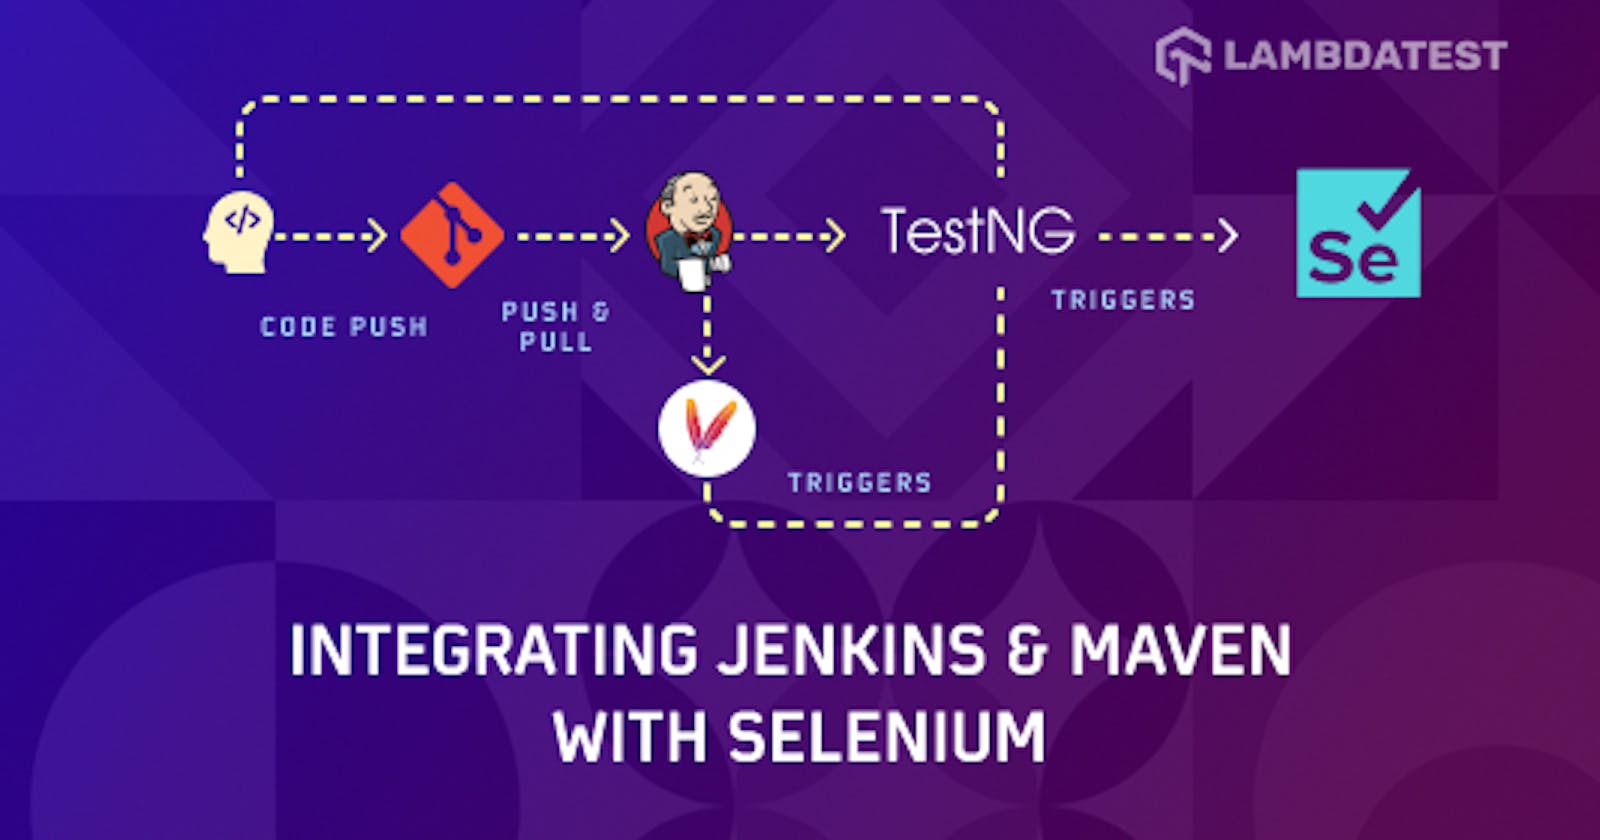 How To Integrate Jenkins & Maven With Selenium?